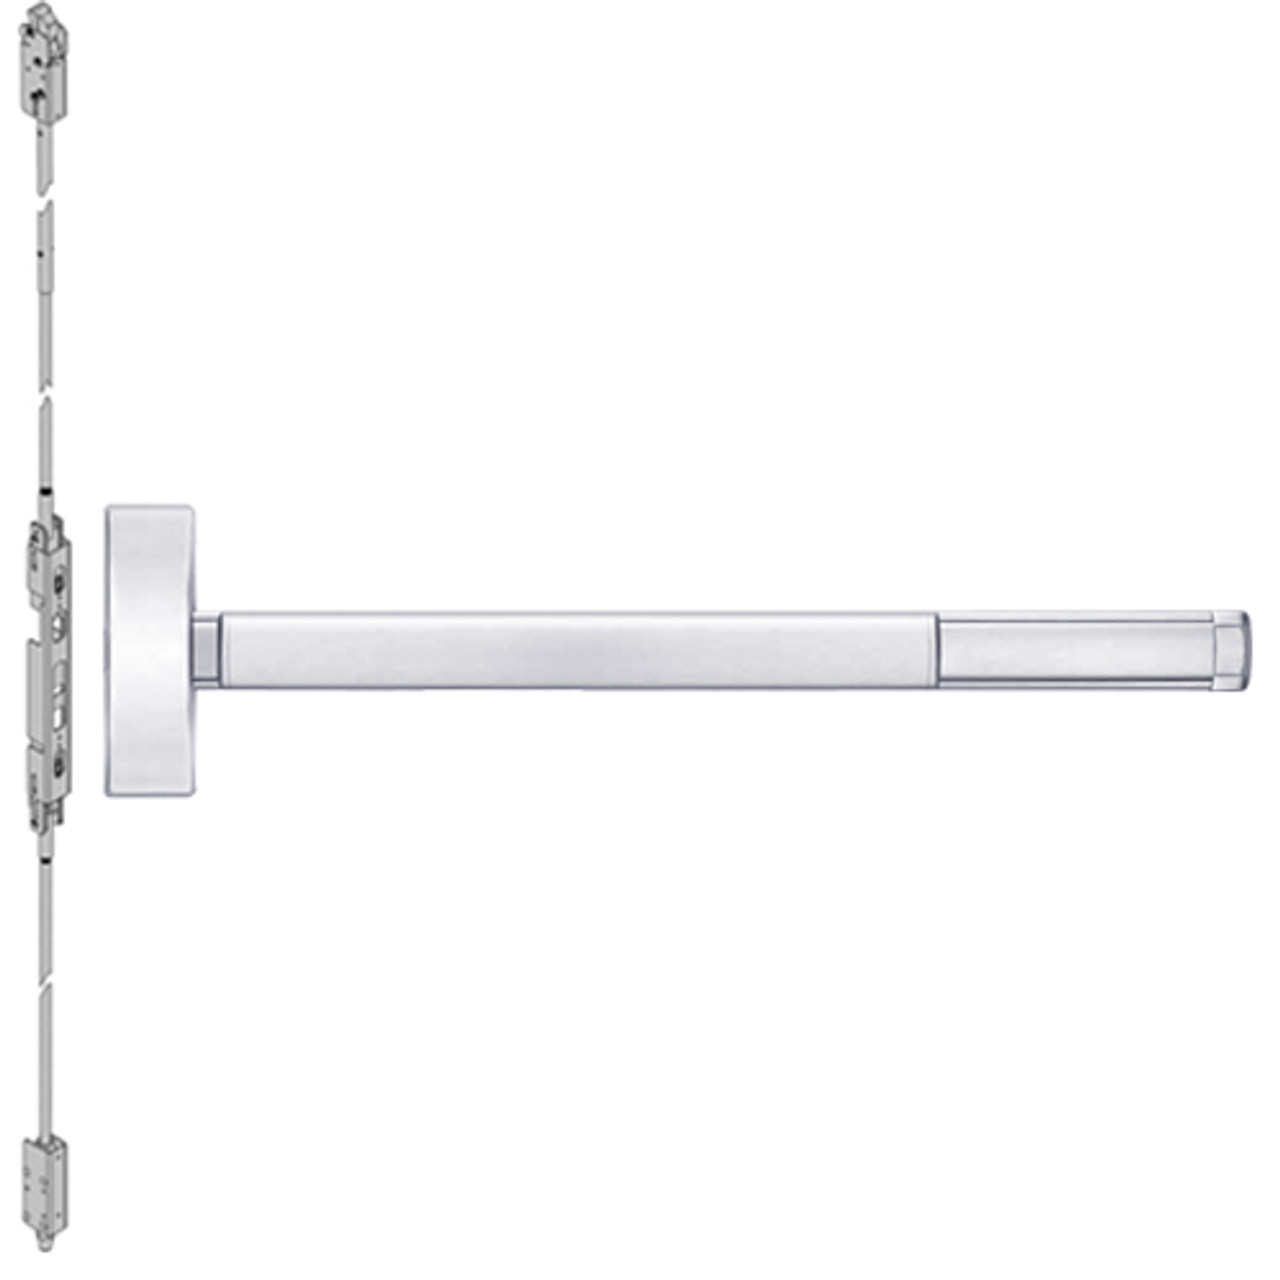 ELR2801-625-48 PHI 2800 Series Concealed Vertical Rod Exit Device with Electric Latch Retraction Prepped for Cover Plate in Bright Chrome Finish